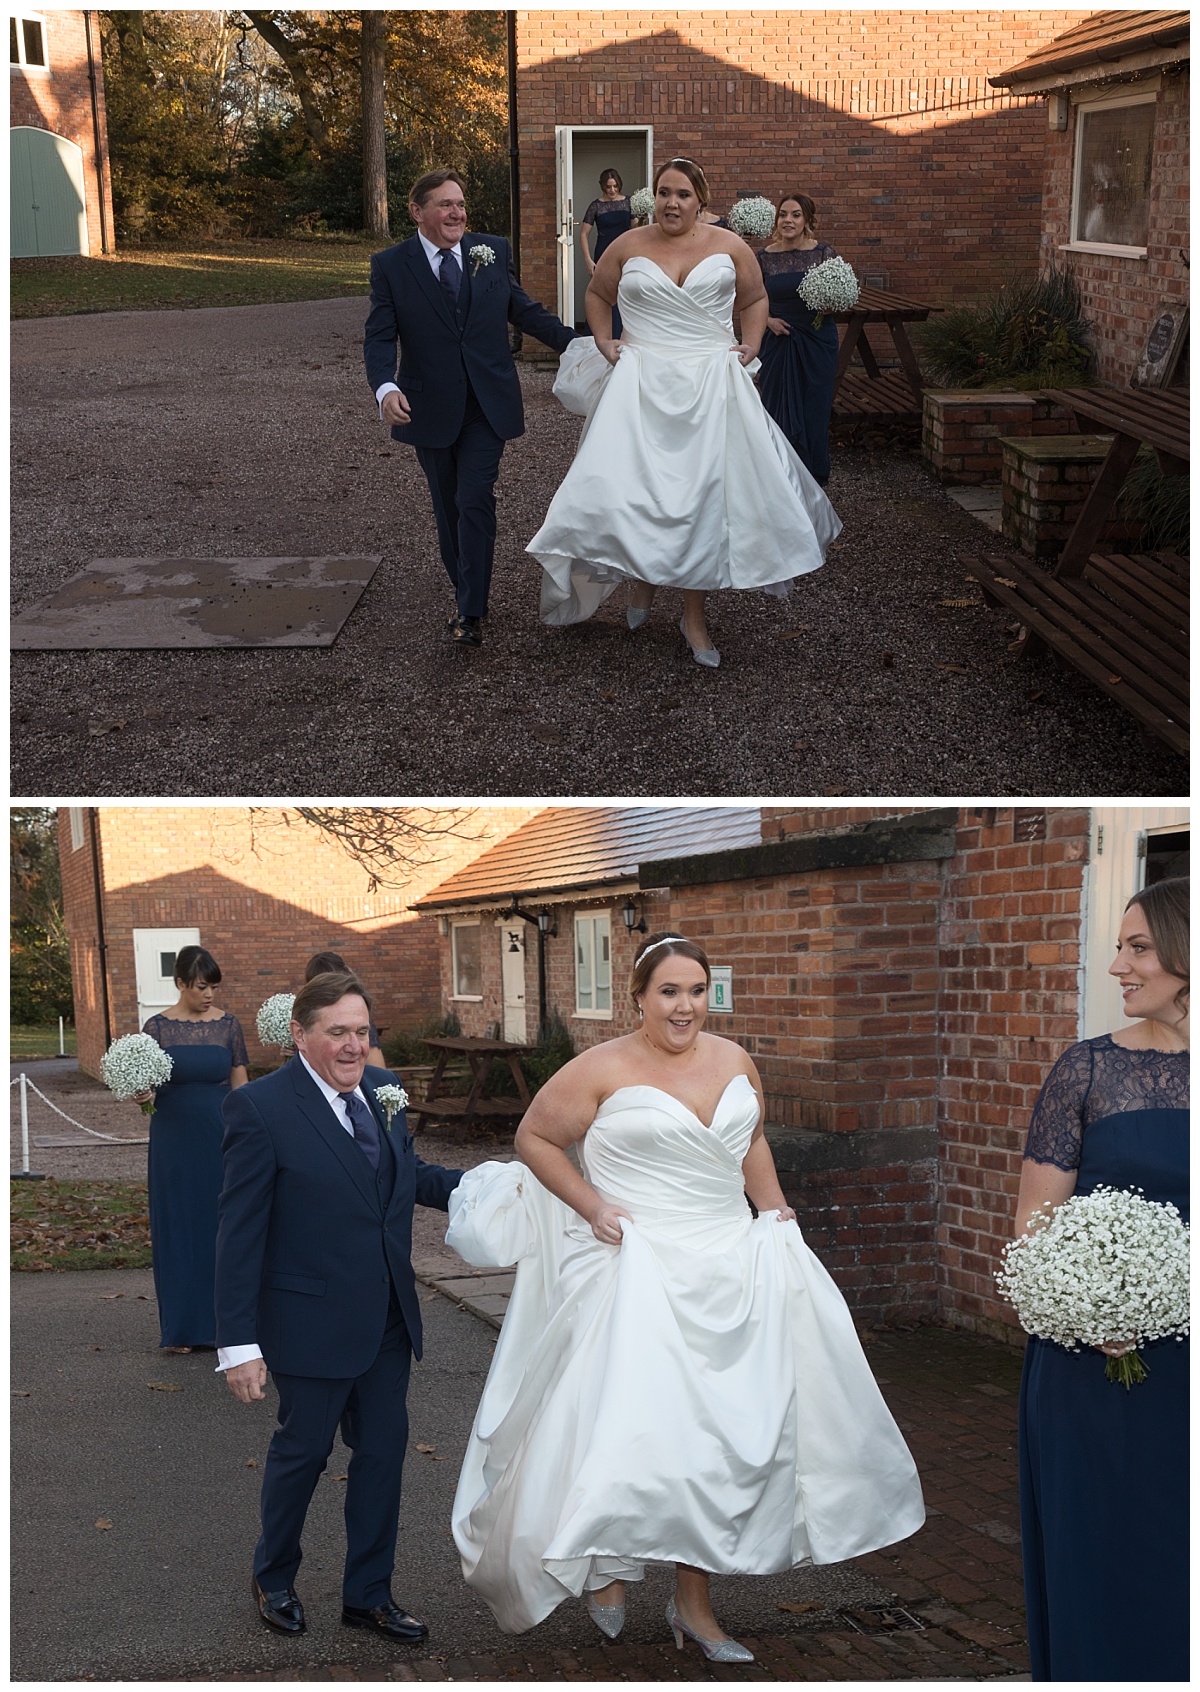 Wedding Photography Manchester - Lorna and Vinny's Abbeywood Estate and Gardens Wedding 39